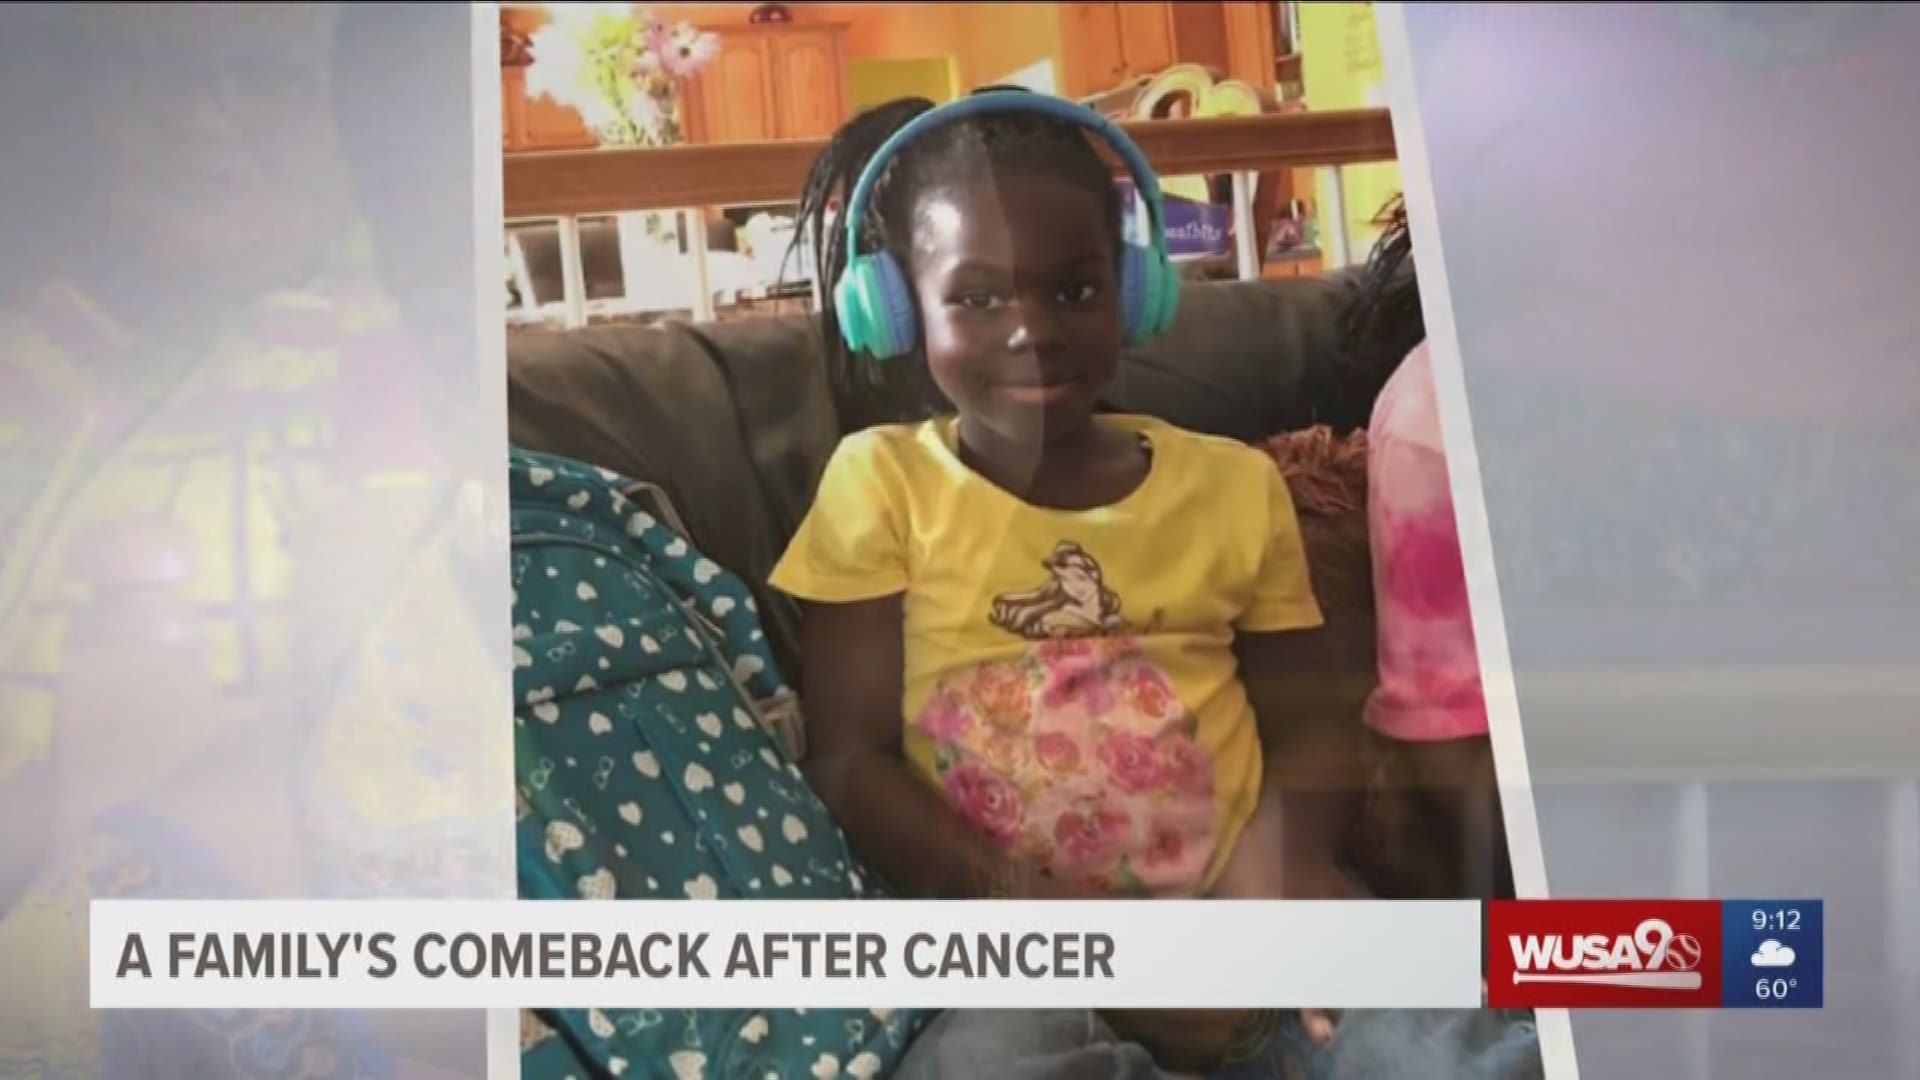 When Derreon was diagnosed with cancer, Apple Federal Credit Union helped them get back on their feet. This segment was sponsored by Apple Federal Credit Union.